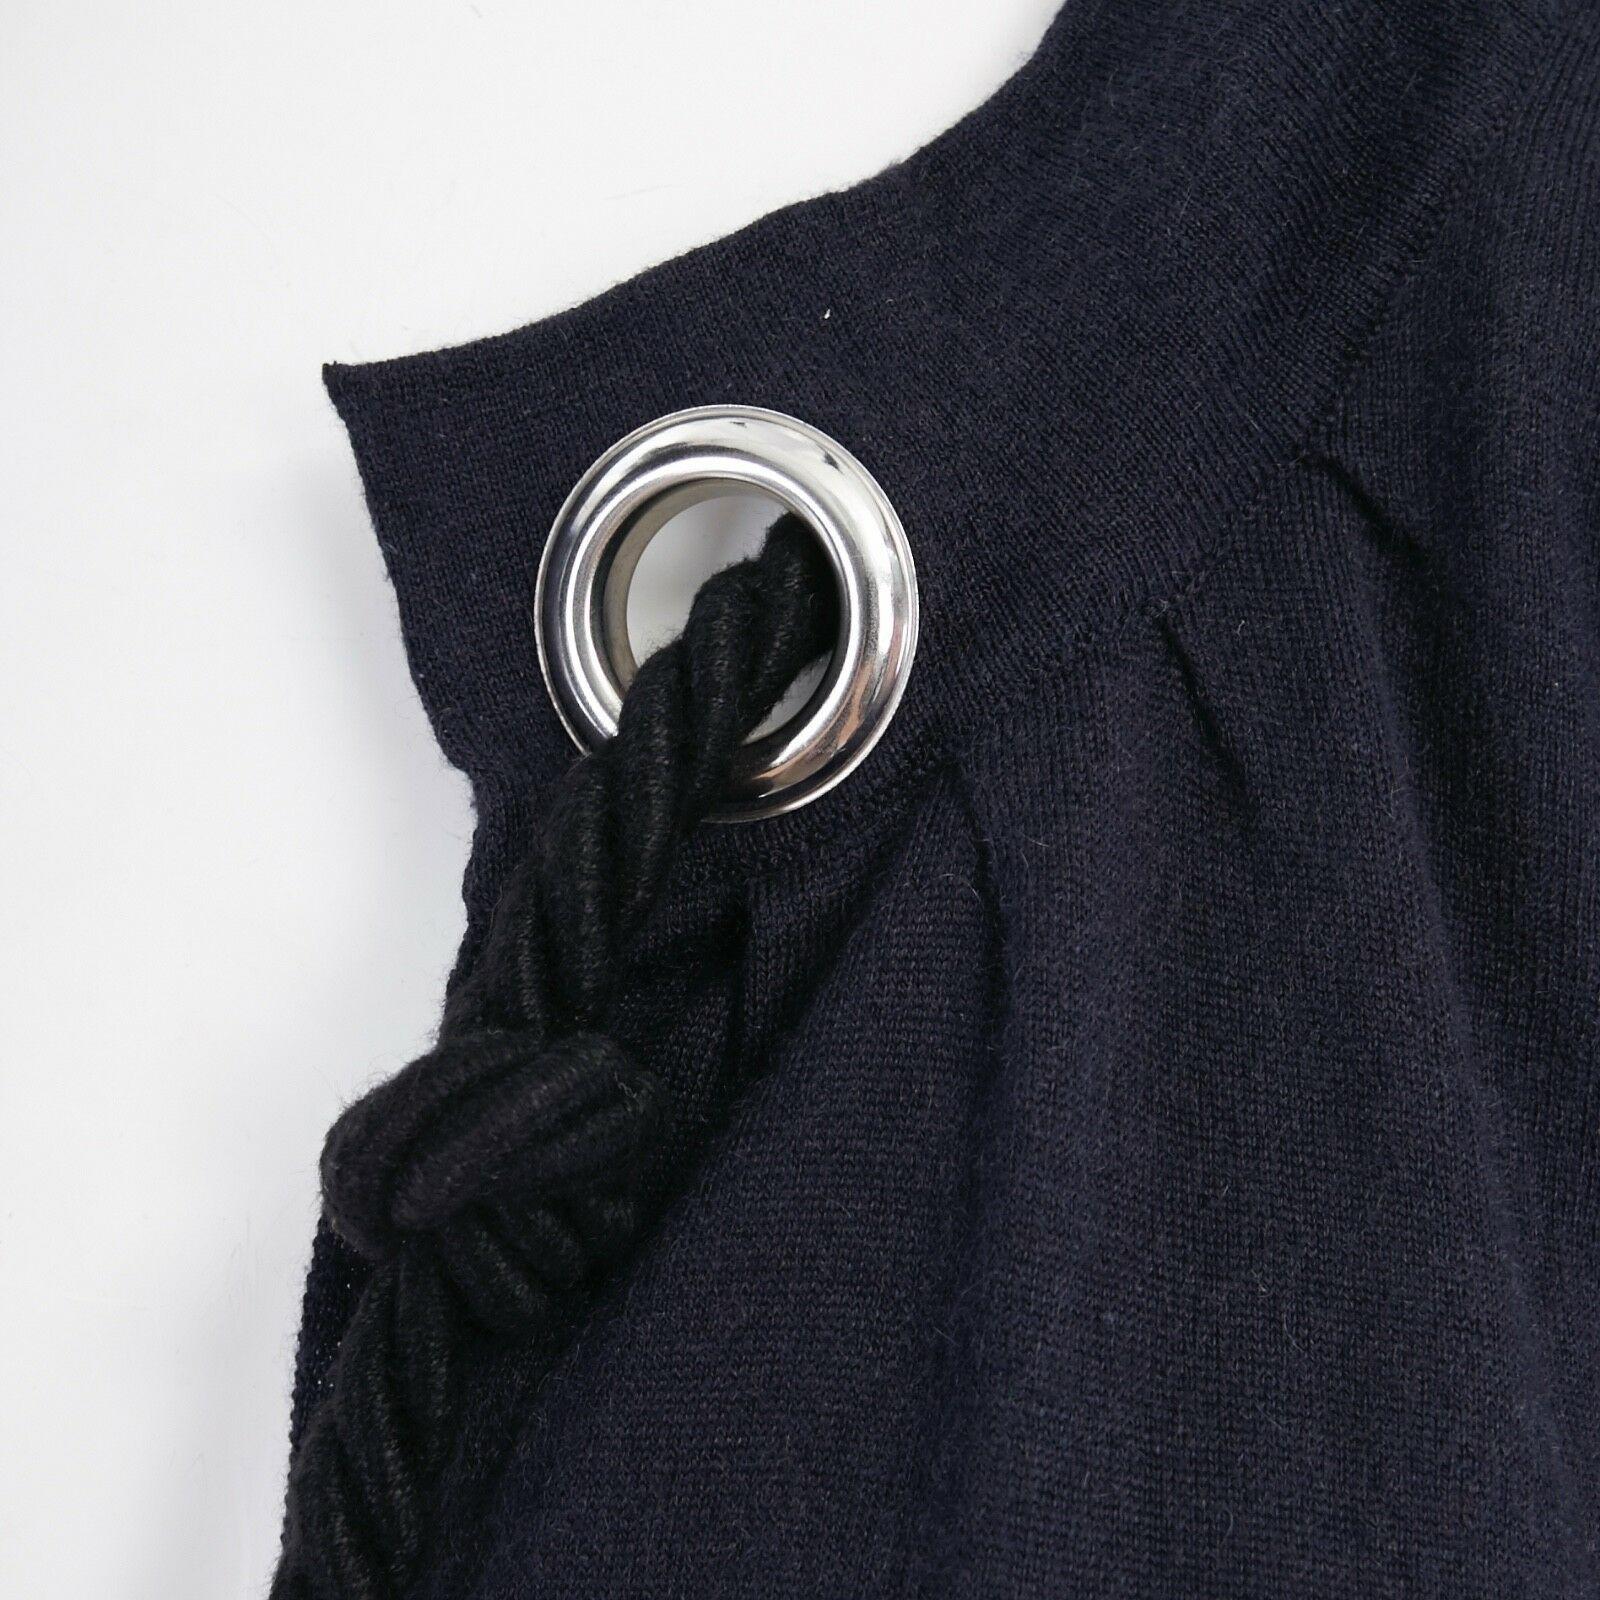 BURBERRY navy ble silk cashmere nautical rope trimmed cardigan sweater S

BURBERRY LONDON
Navy blue silk, cashmere . Nautical inspired . Chunky black twisted rope trimmed neckline with silver hardware . Silver grommet . Open front . Raw rolled hem .